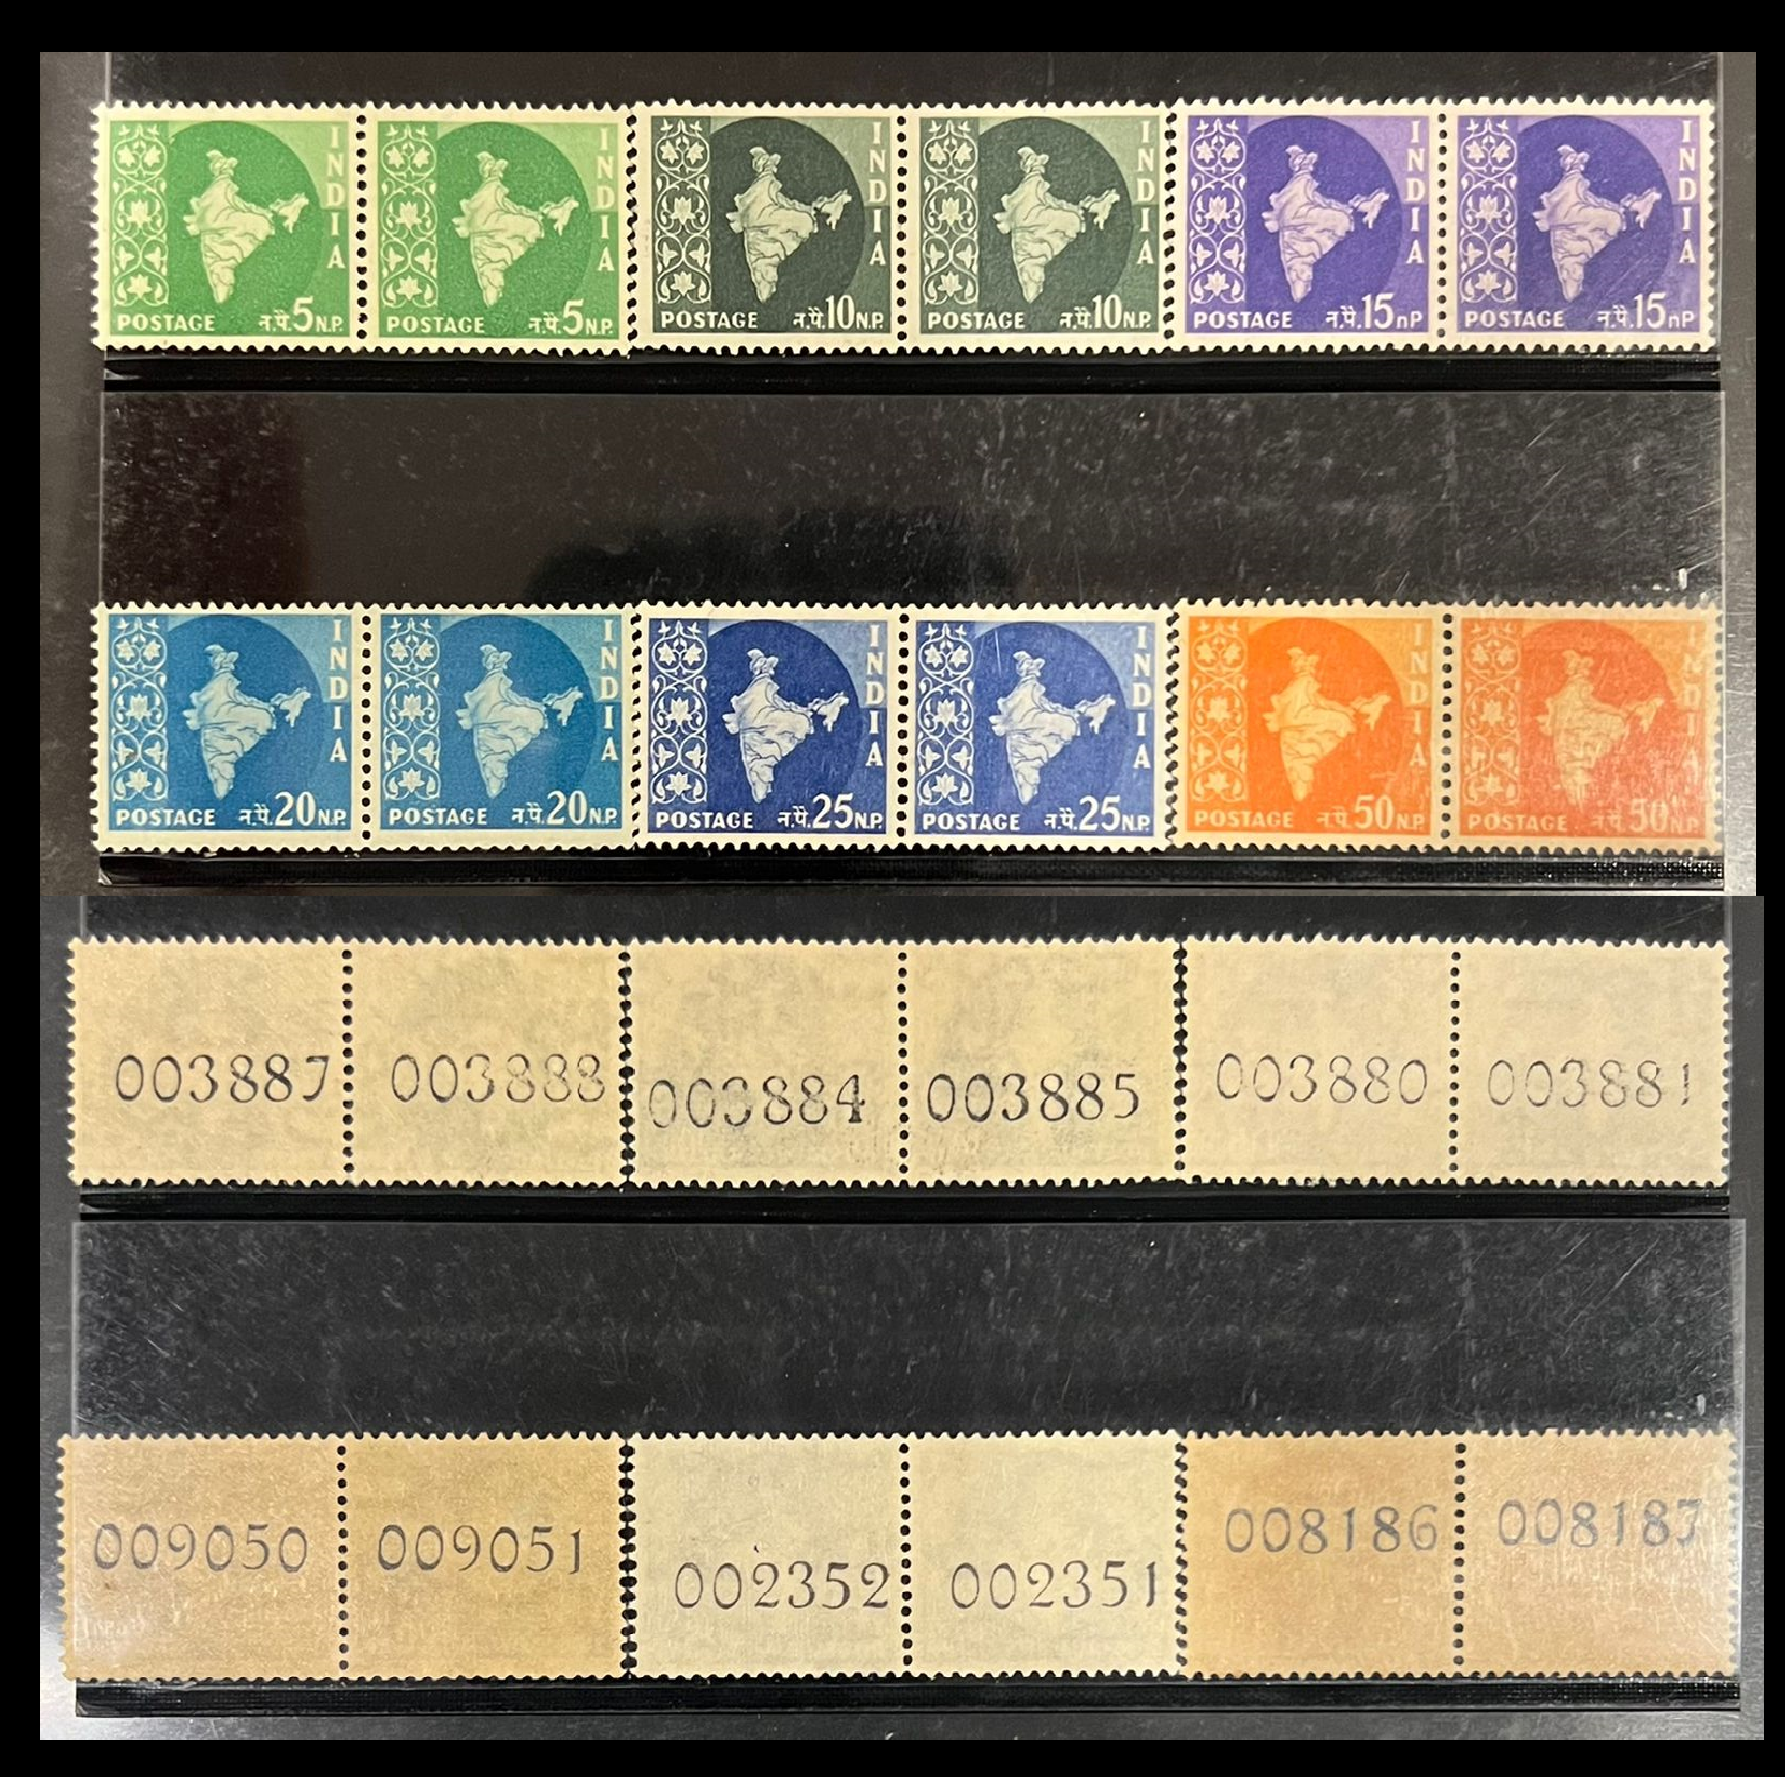 India 1958 Maps Coil Stamps Complete Set in Pairs MNH Rare